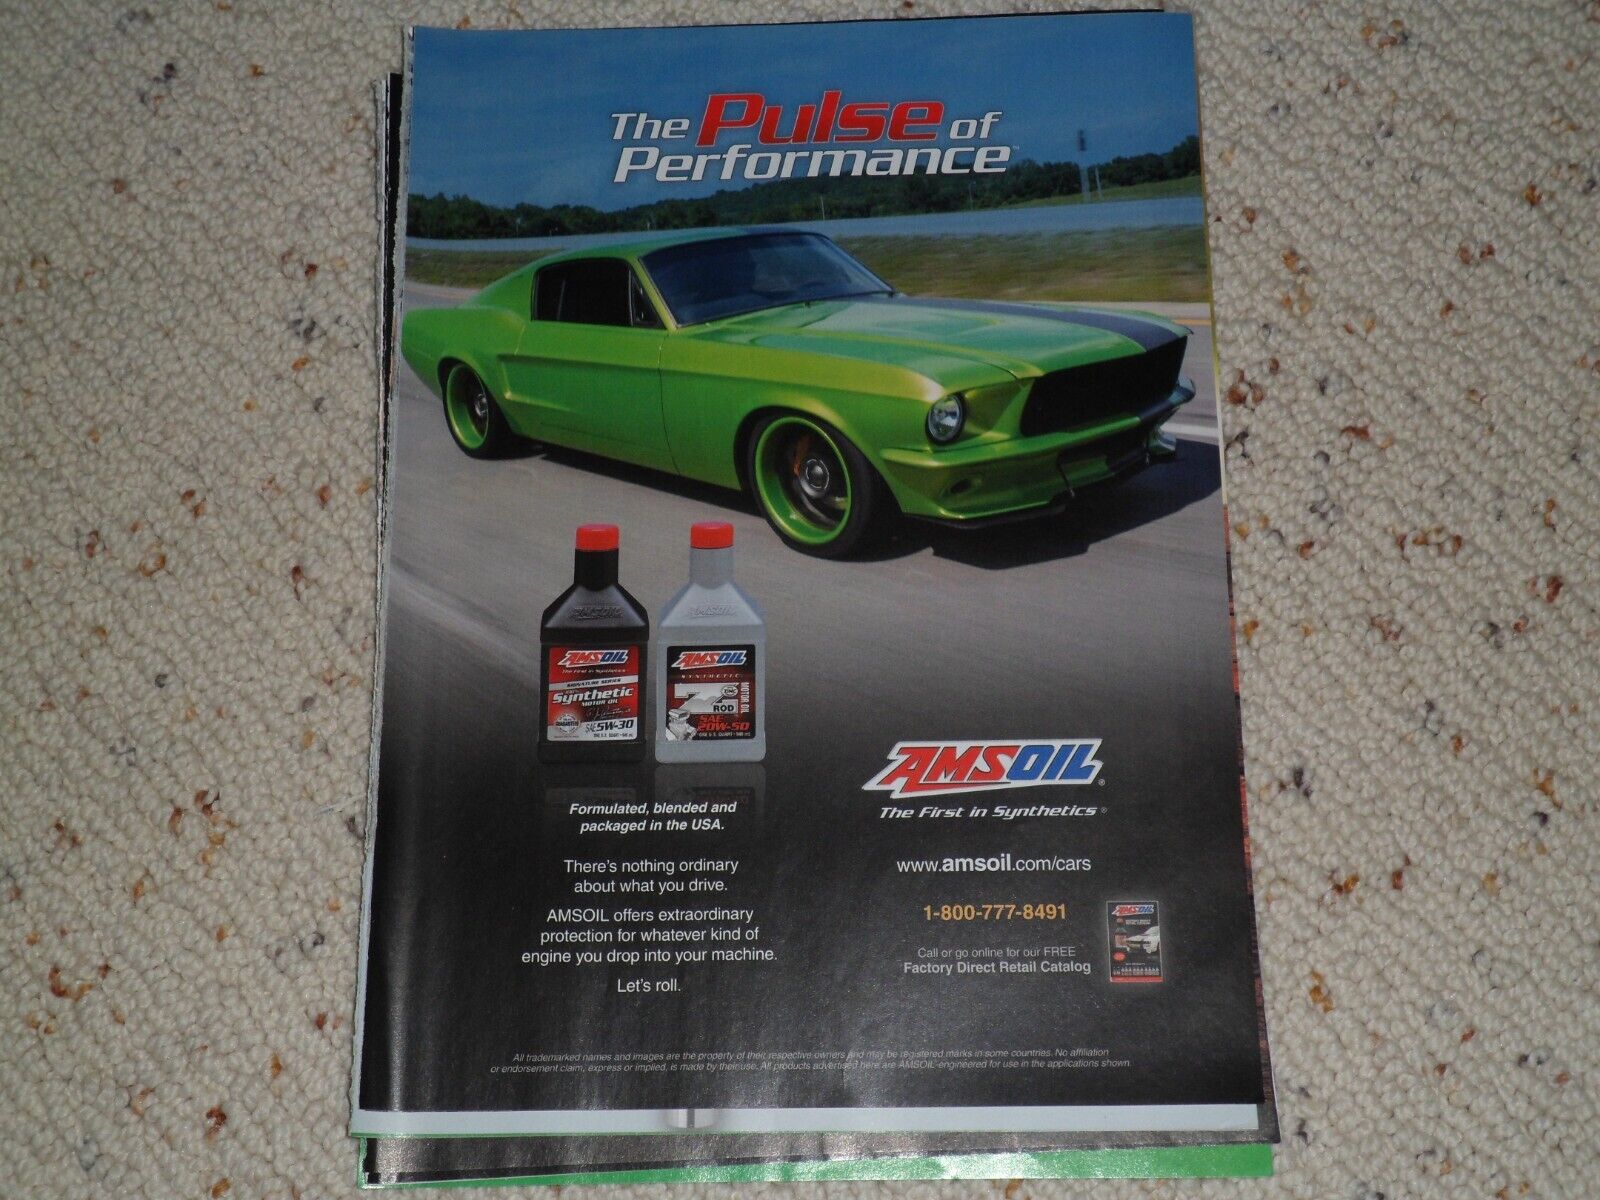 2015 AMSOIL #3 AD / ARTICLE